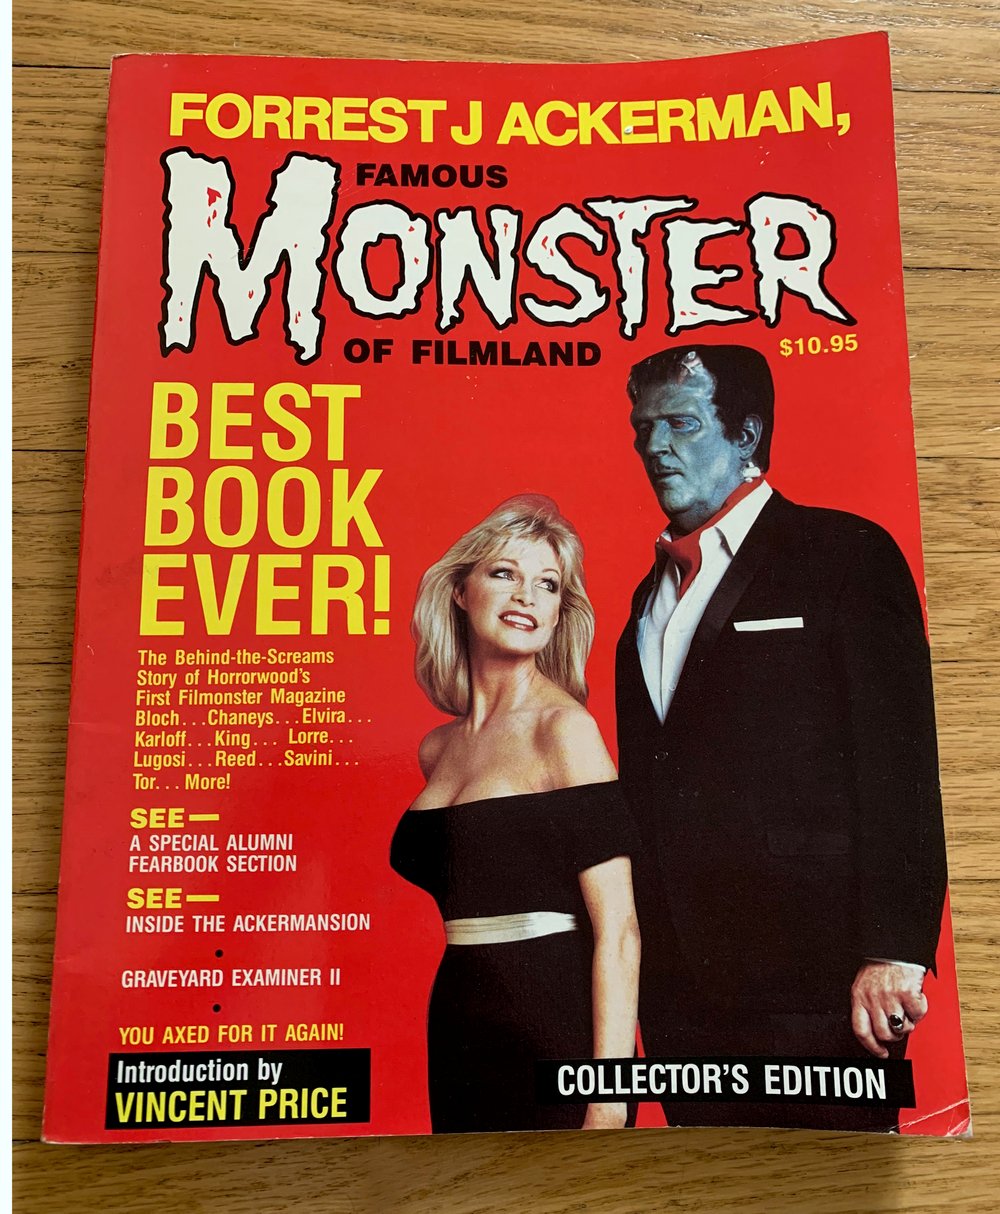 FAMOUS MONSTERS OF FILMLAND : BEST BOOK EVER by Forrest J. Ackerman